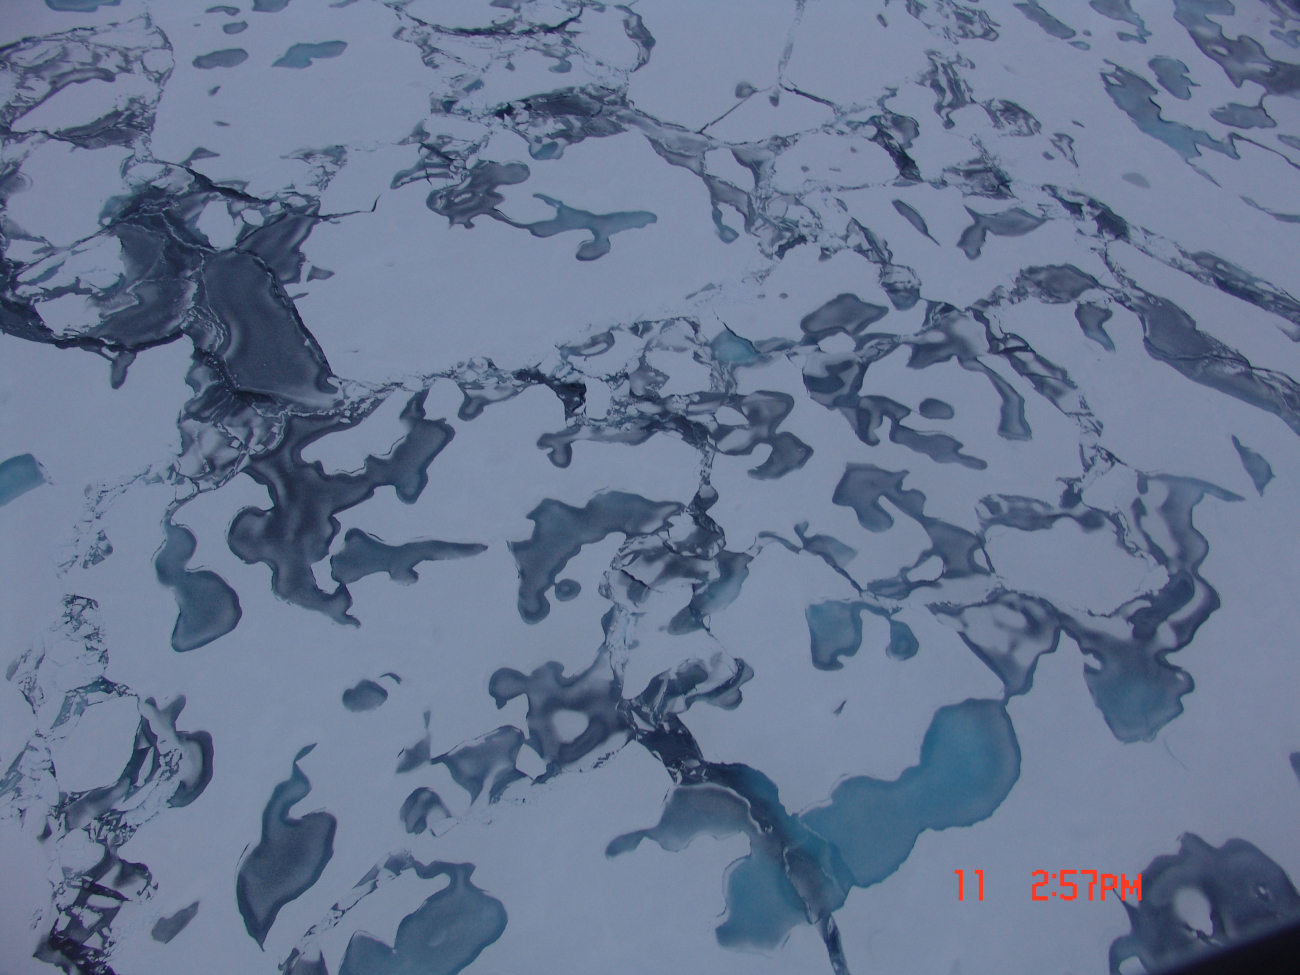 A helicopter view of the refreezing of ice flows and melt pools